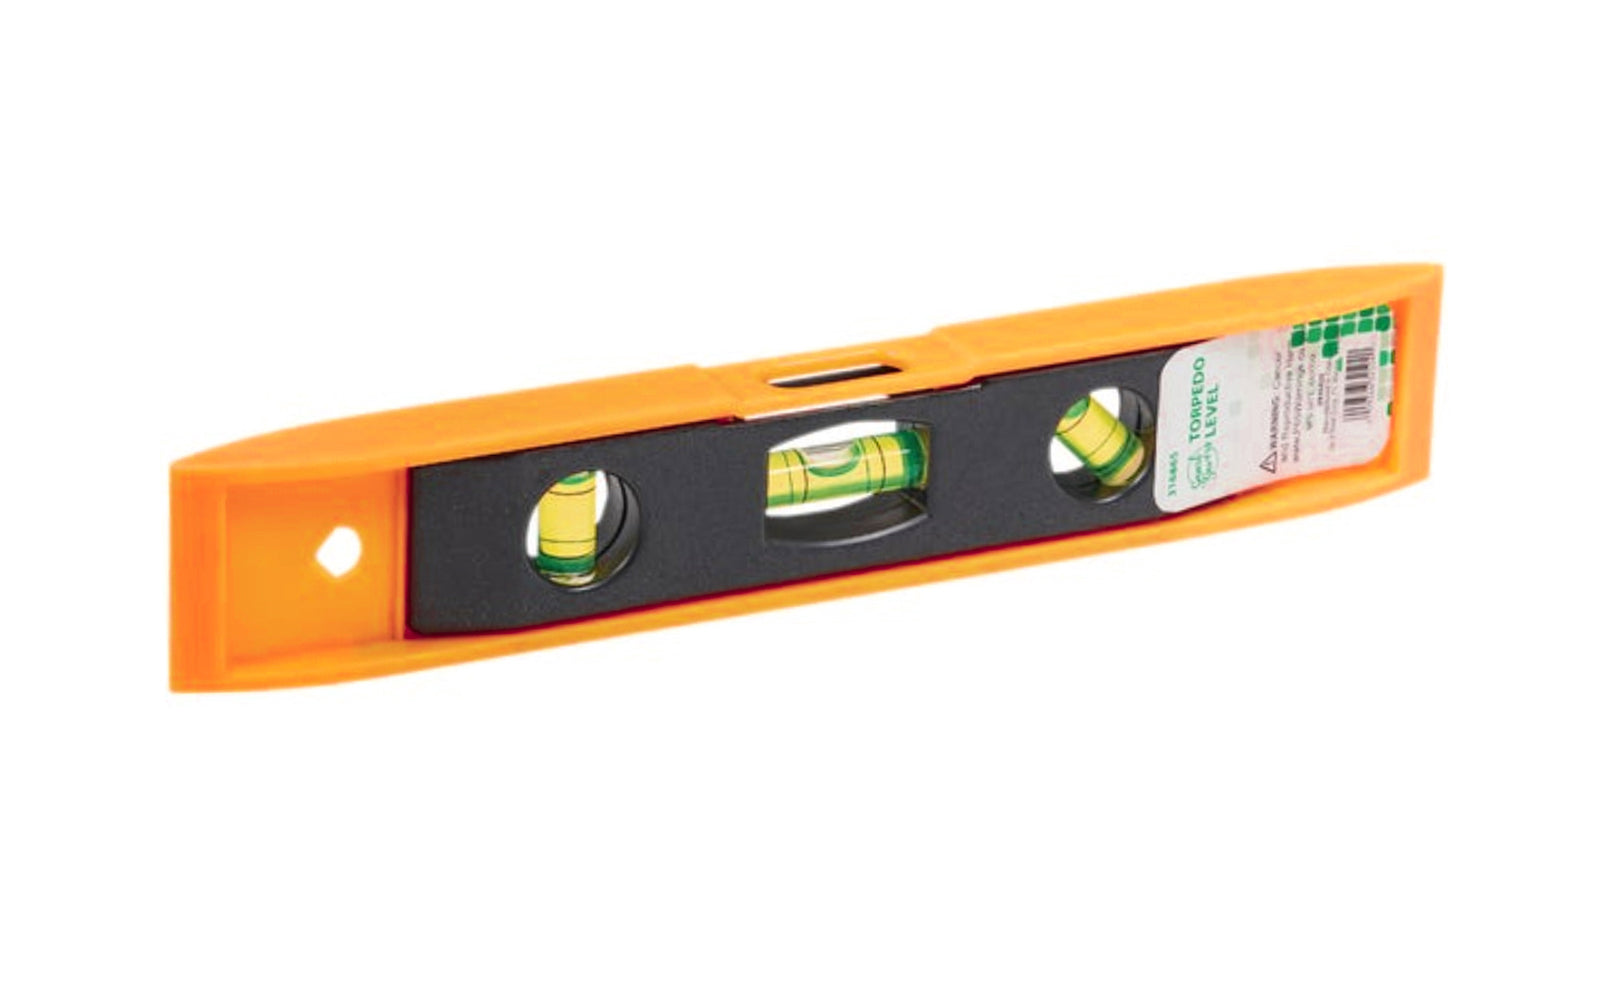 This 9" Plastic Torpedo Level is a basic & economy homeowner torpedo level designed for simple & basic projects around the house. Reads plumb, level, and 45-degree. Includes convenient hang hole for easy storage. 